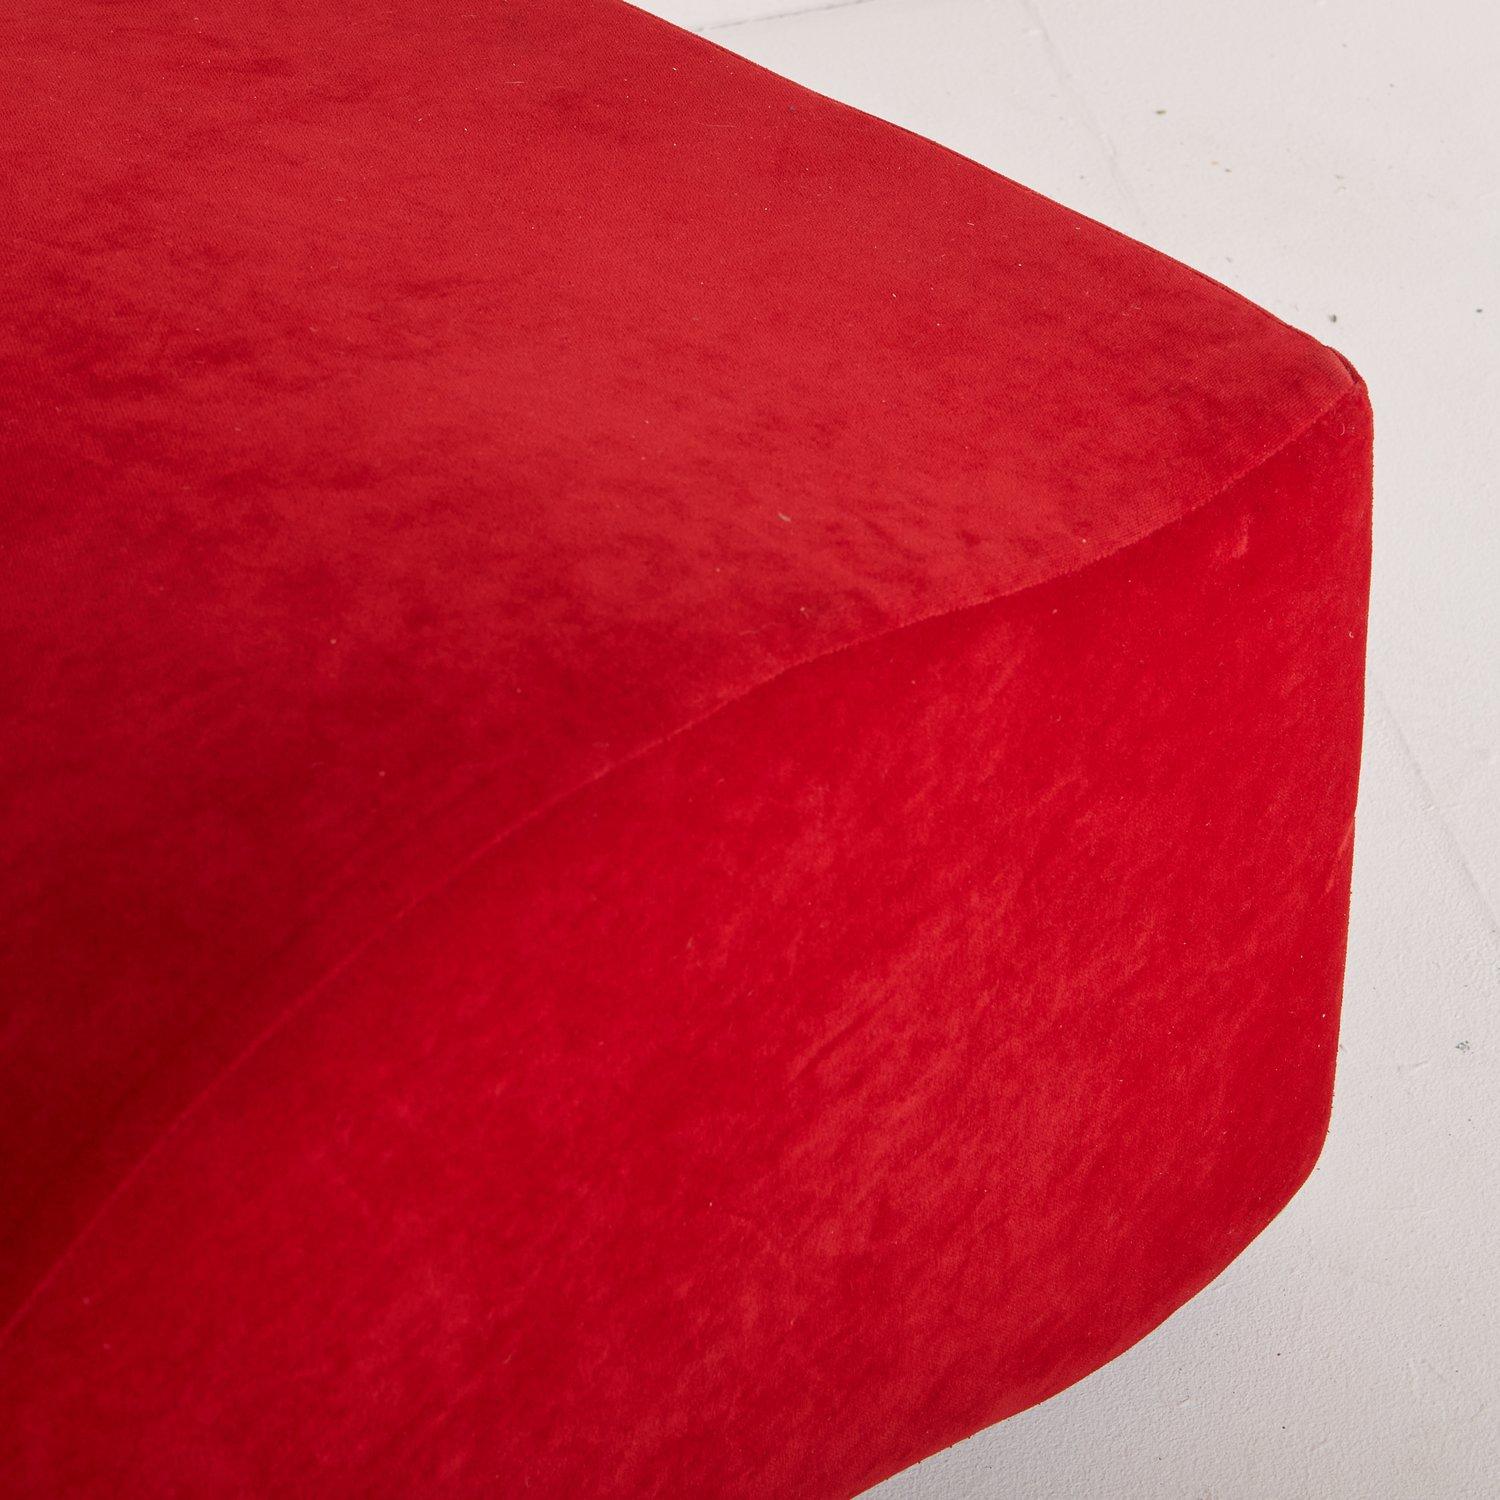 American Red Ripple Bench by Laurinda Spear for Coalesse